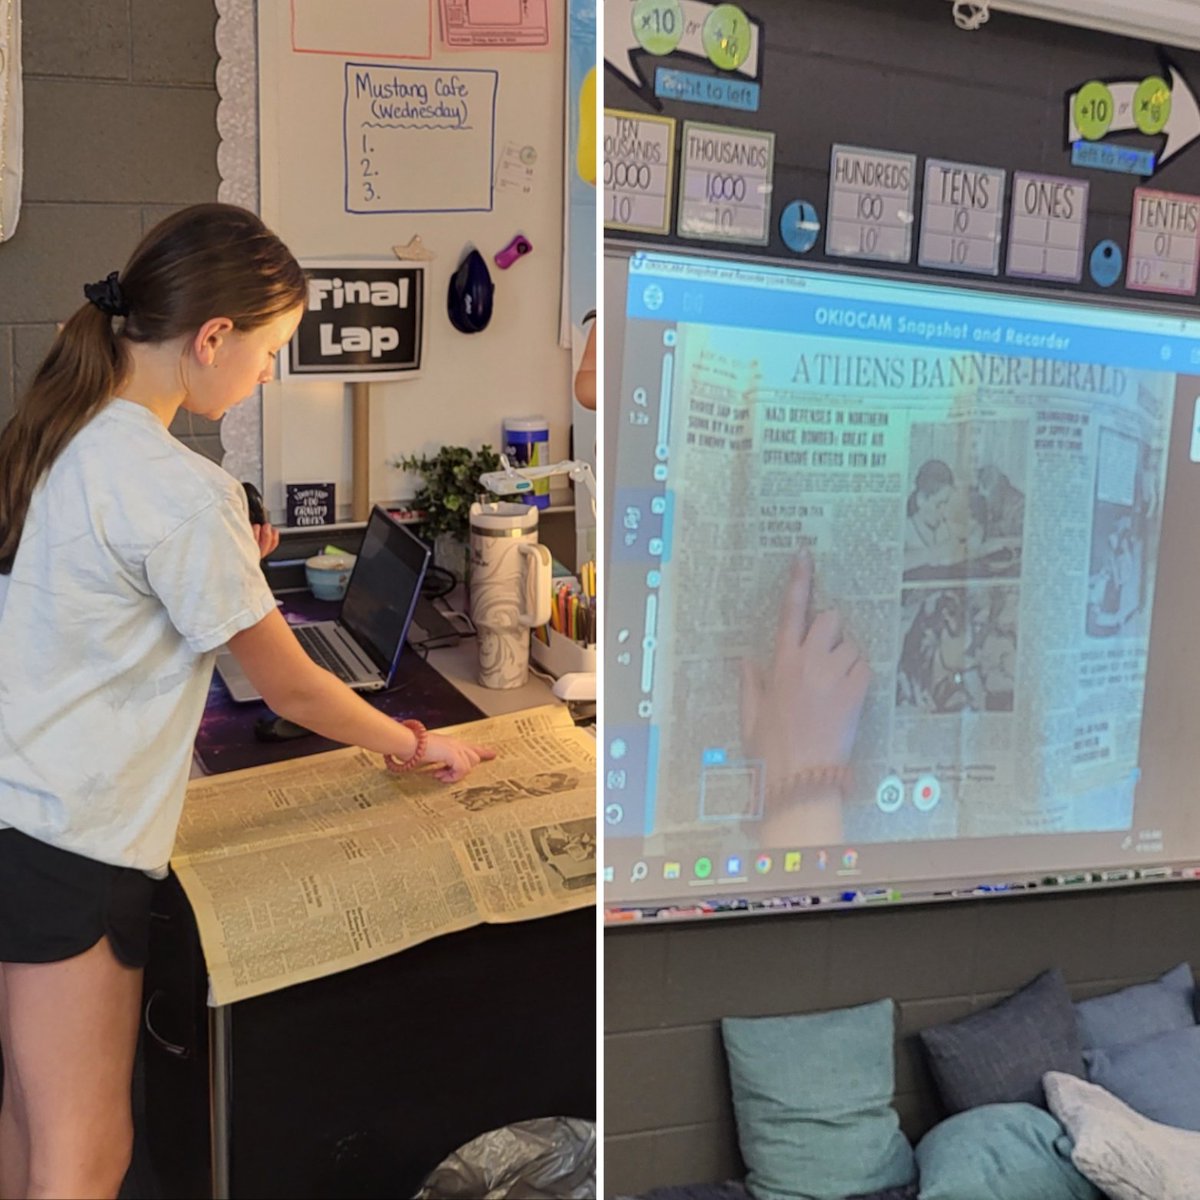 We got to see a local newspaper from 1944 today! This student brought it to share. We saw articles about WWII battles, blockades, rationing paper, planting victory gardens, and encouraging women to vote. Loved all the connections to social studies! @CFESmustangs @OconeeCoSchools